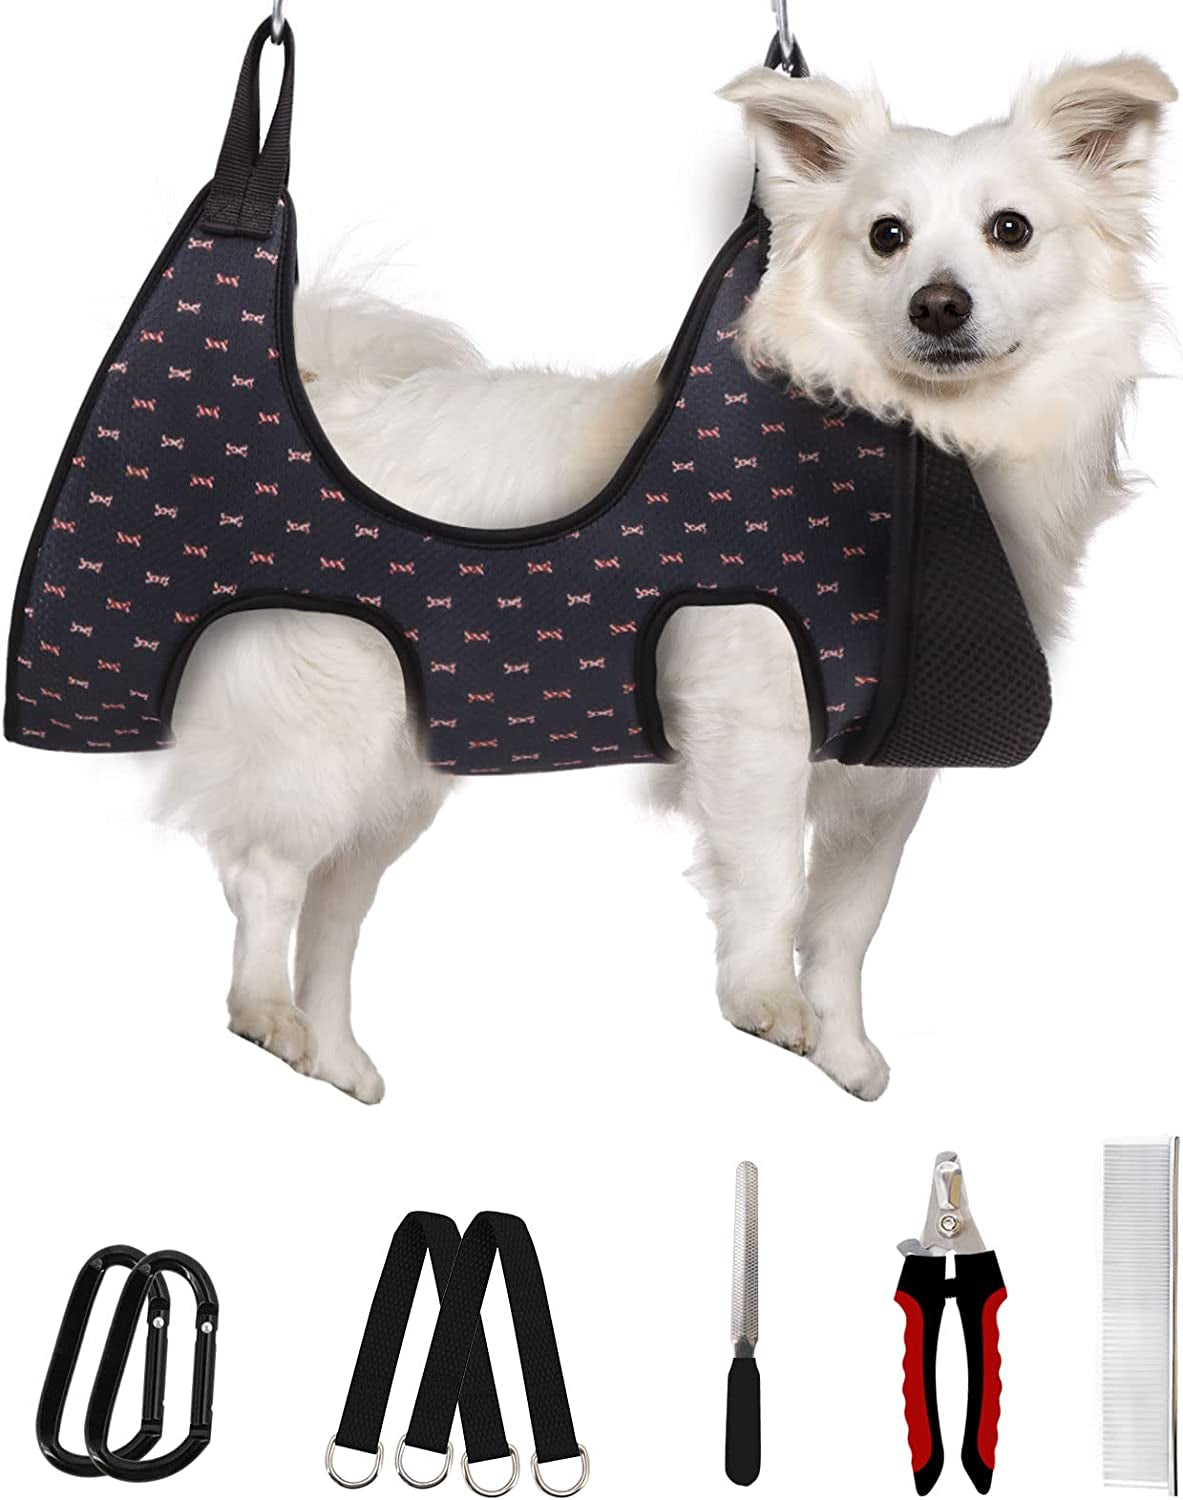 Pet Grooming Hammock Harness: Restraint Sling for Cats & Dogs - Nail Trimming Helper